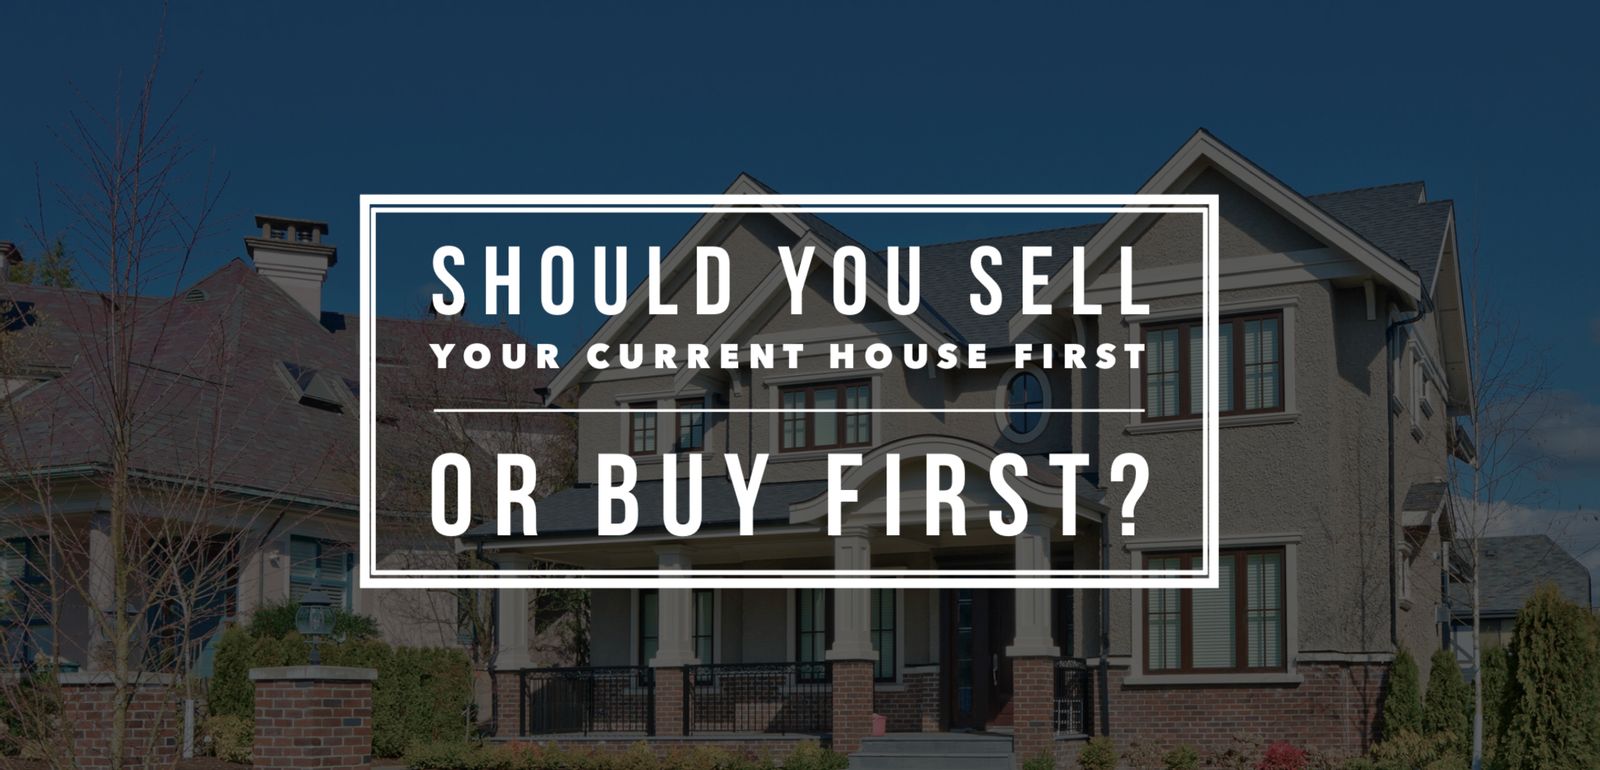 Should You Sell Your Current Home First Or Buy First?